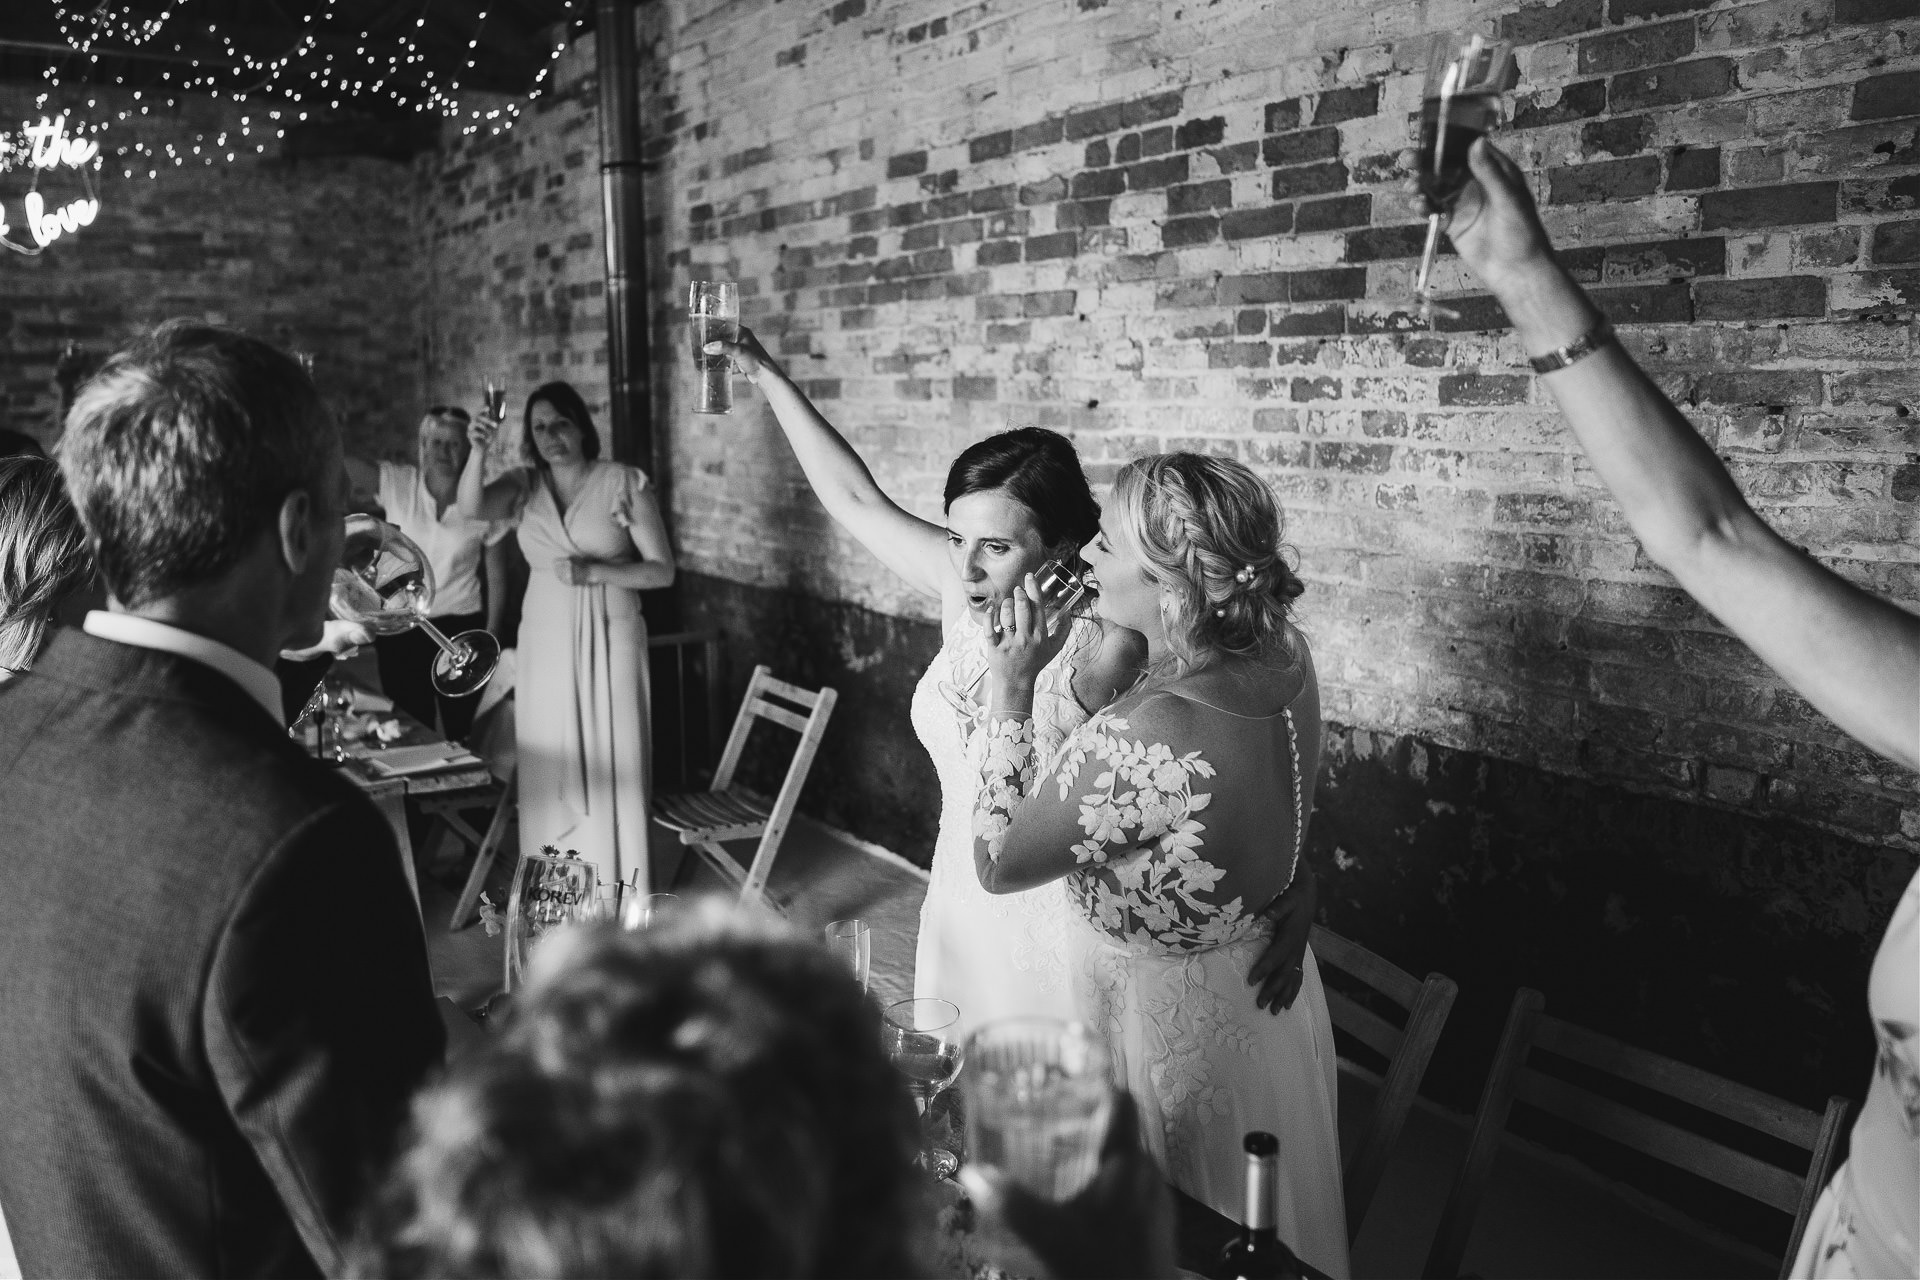 Two brides cuddling and raising glasses to their guests